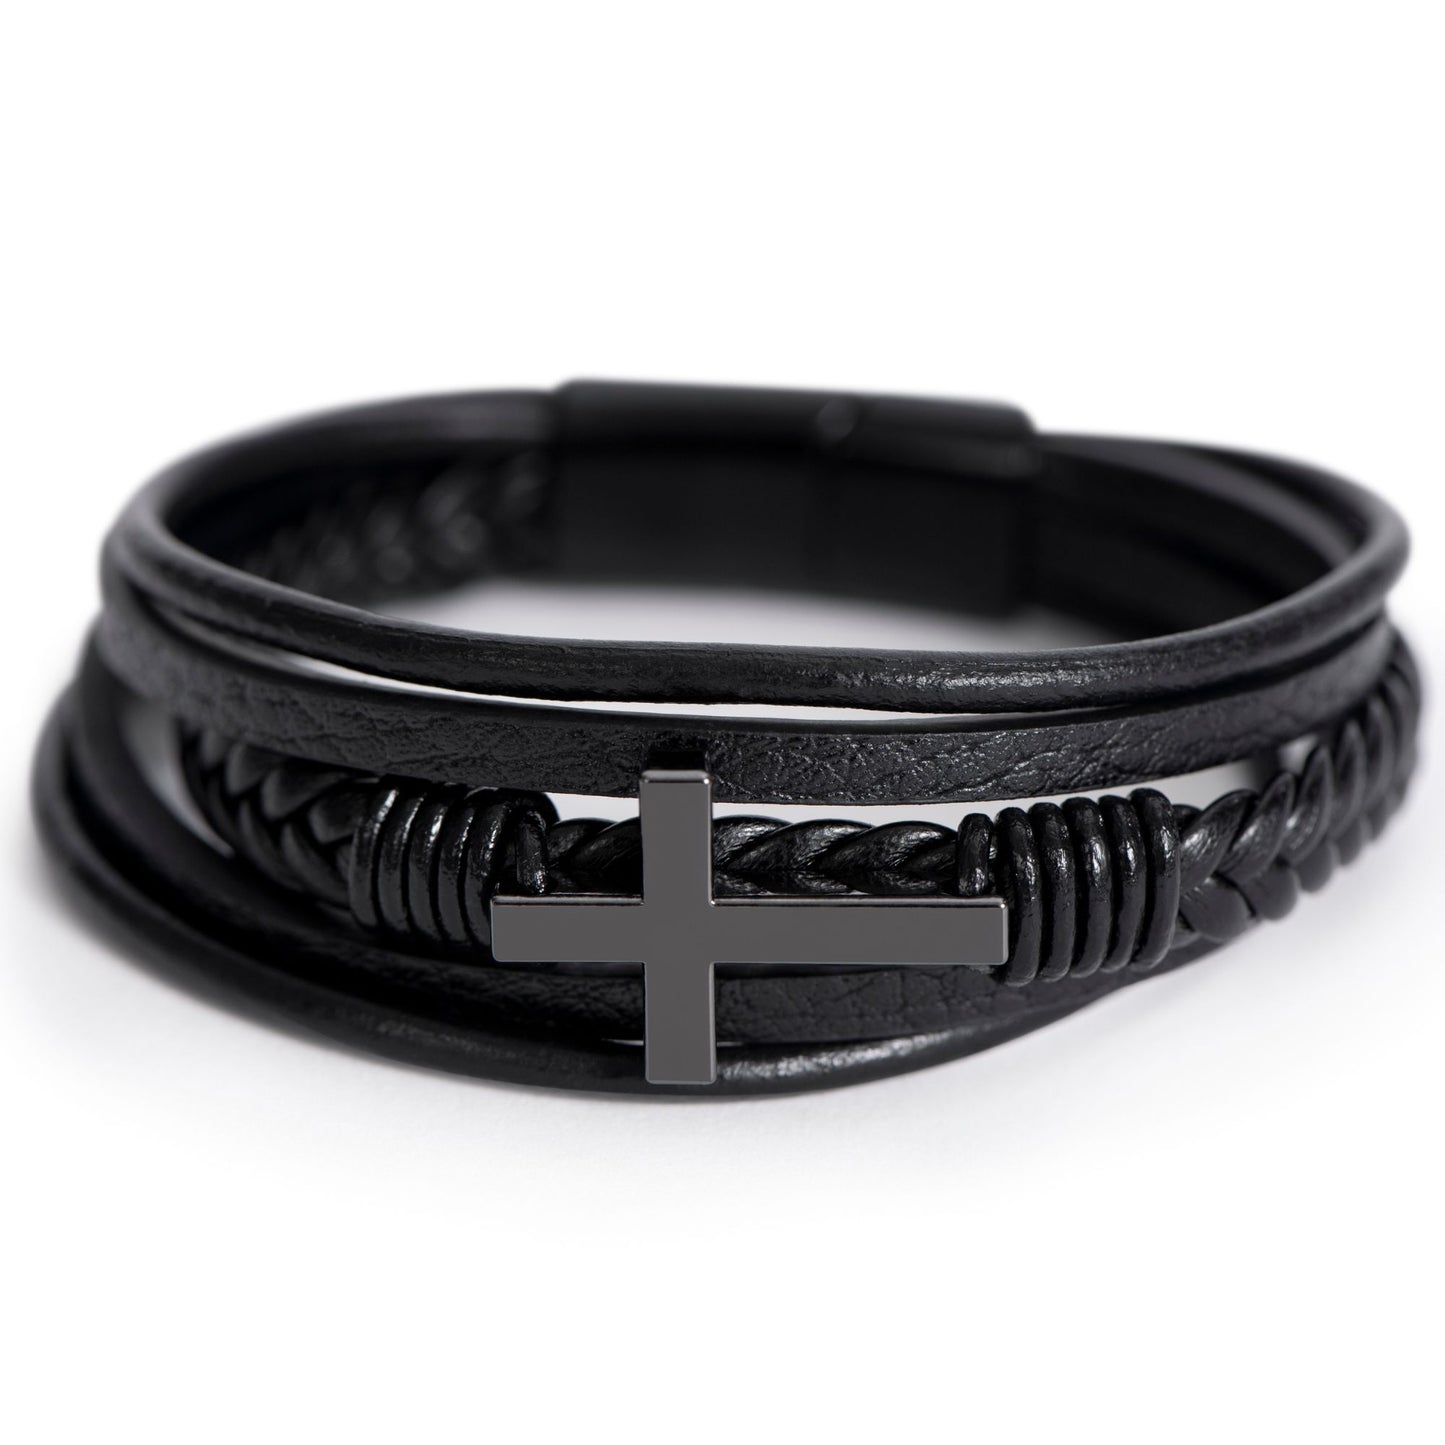 Faith Does Not Make Things Easy - Men's Cross and Black Braided Rope Bracelet Jesus Passion Apparel